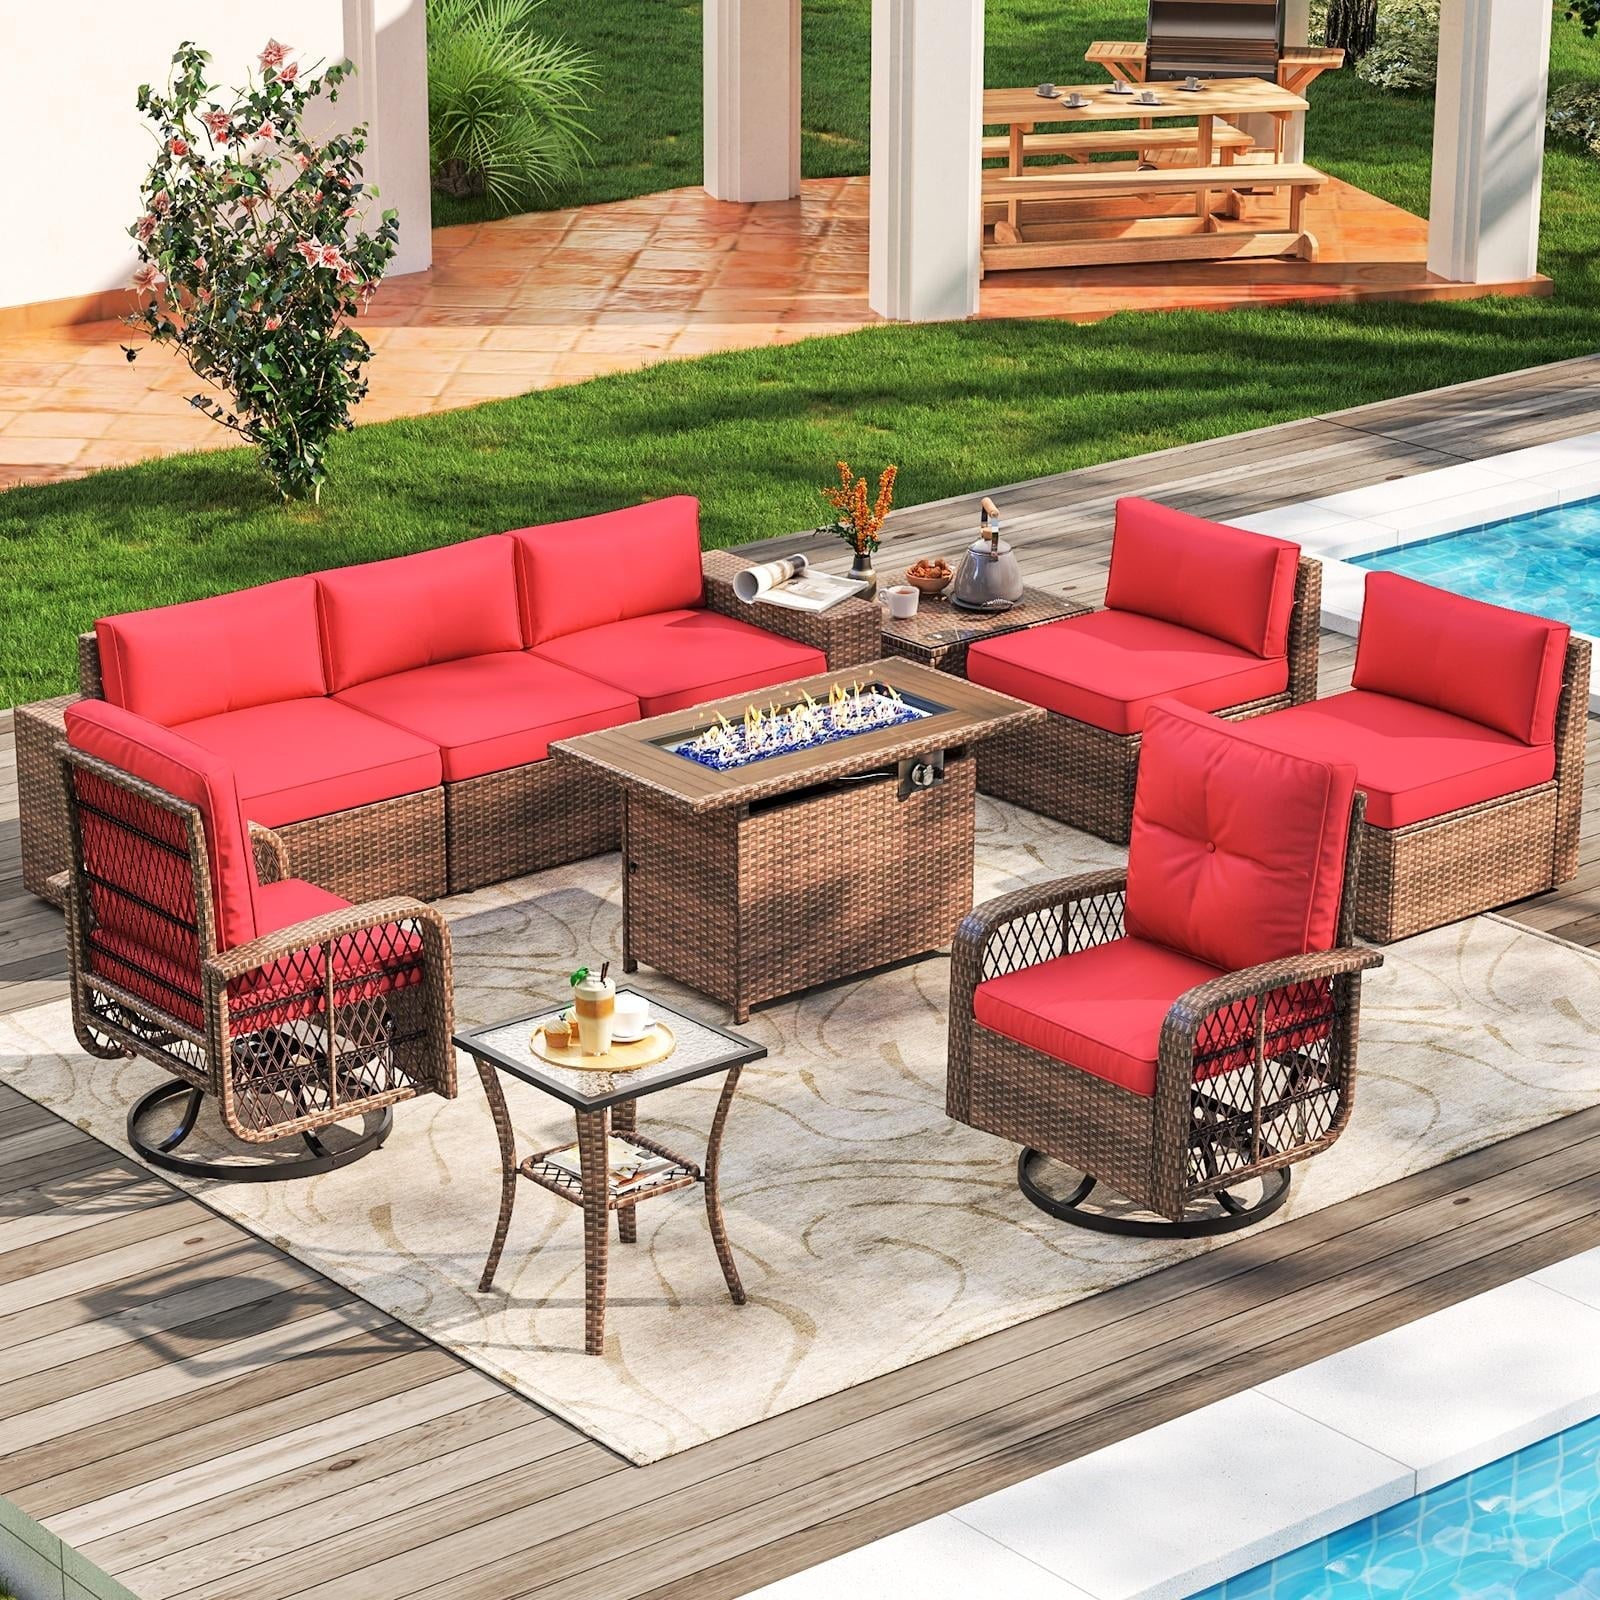 10pcs Patio Conversation Set with Fire Pit Table , Outdoor PE Rattan Sectional Sofa Sets with Swivel Chairs for Backyard,Red